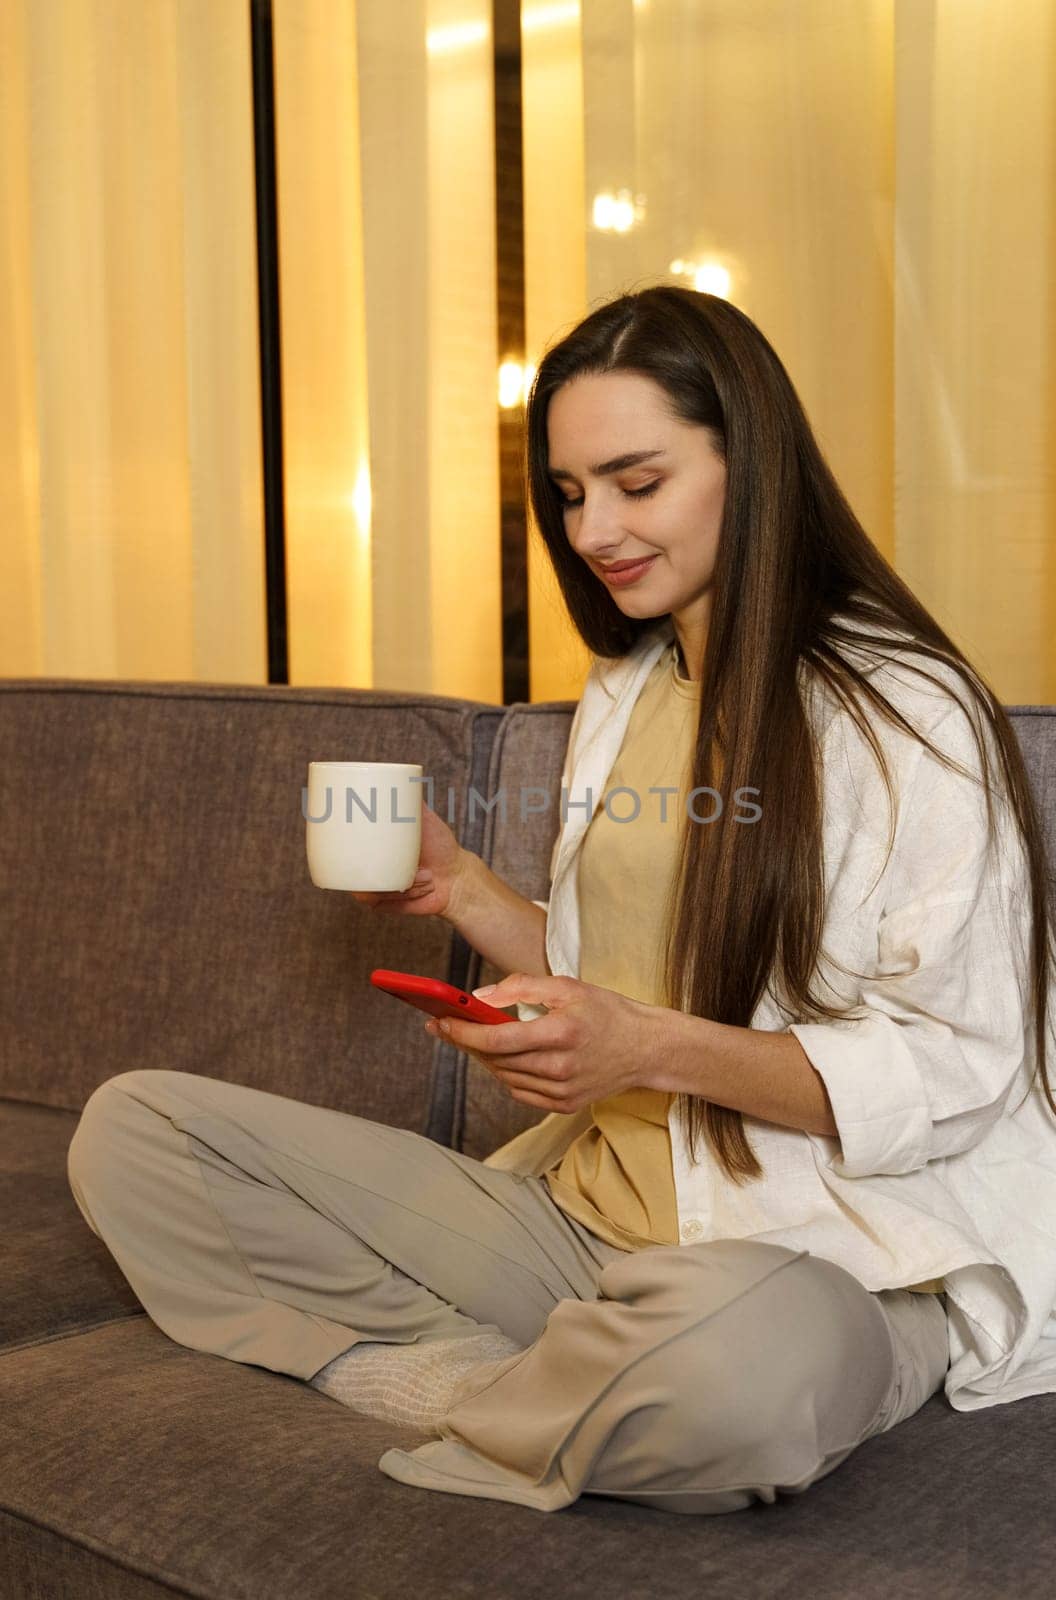 Young woman chatting with friends, surfing on the phone, enjoying her weekend at home with a cup of tea. Vertical frame.